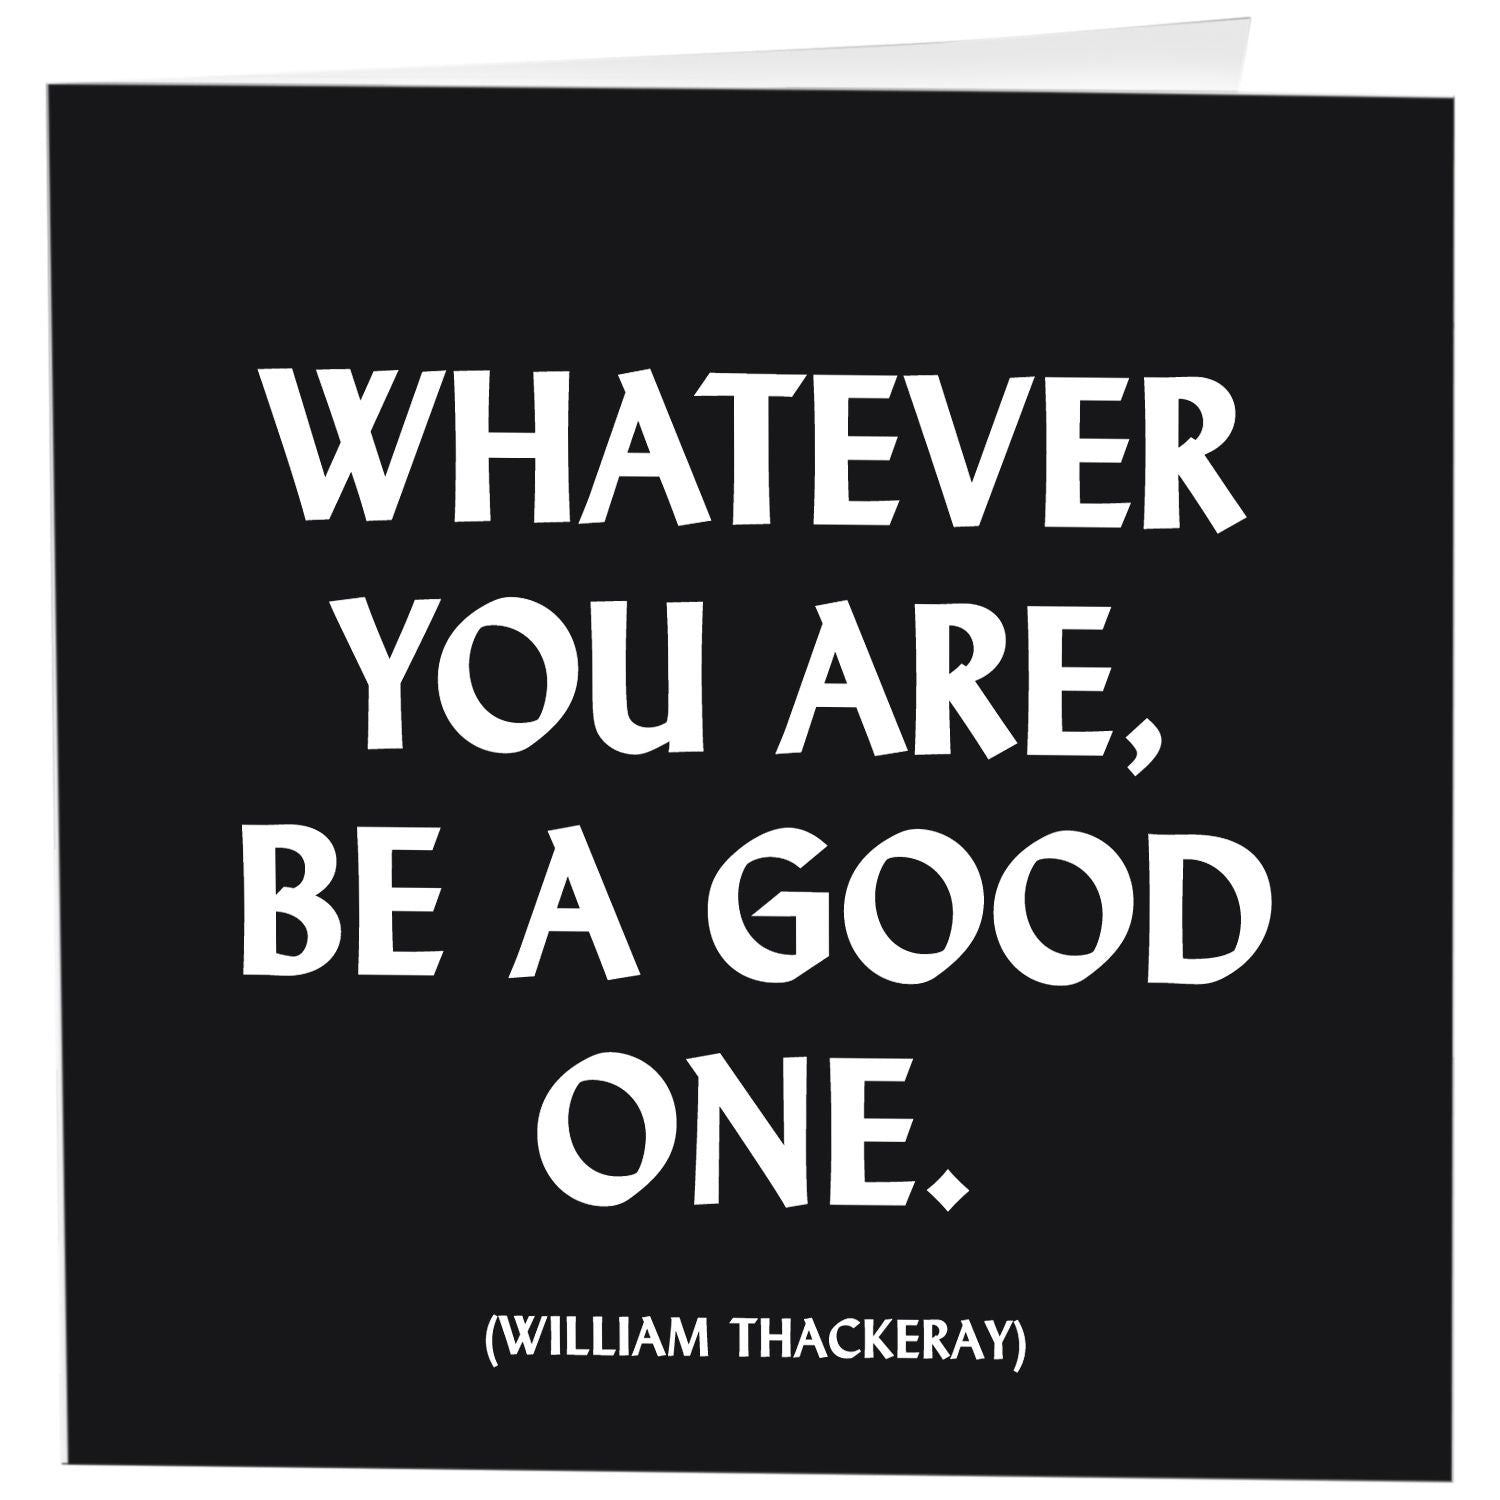 Whatever you are, be a good one